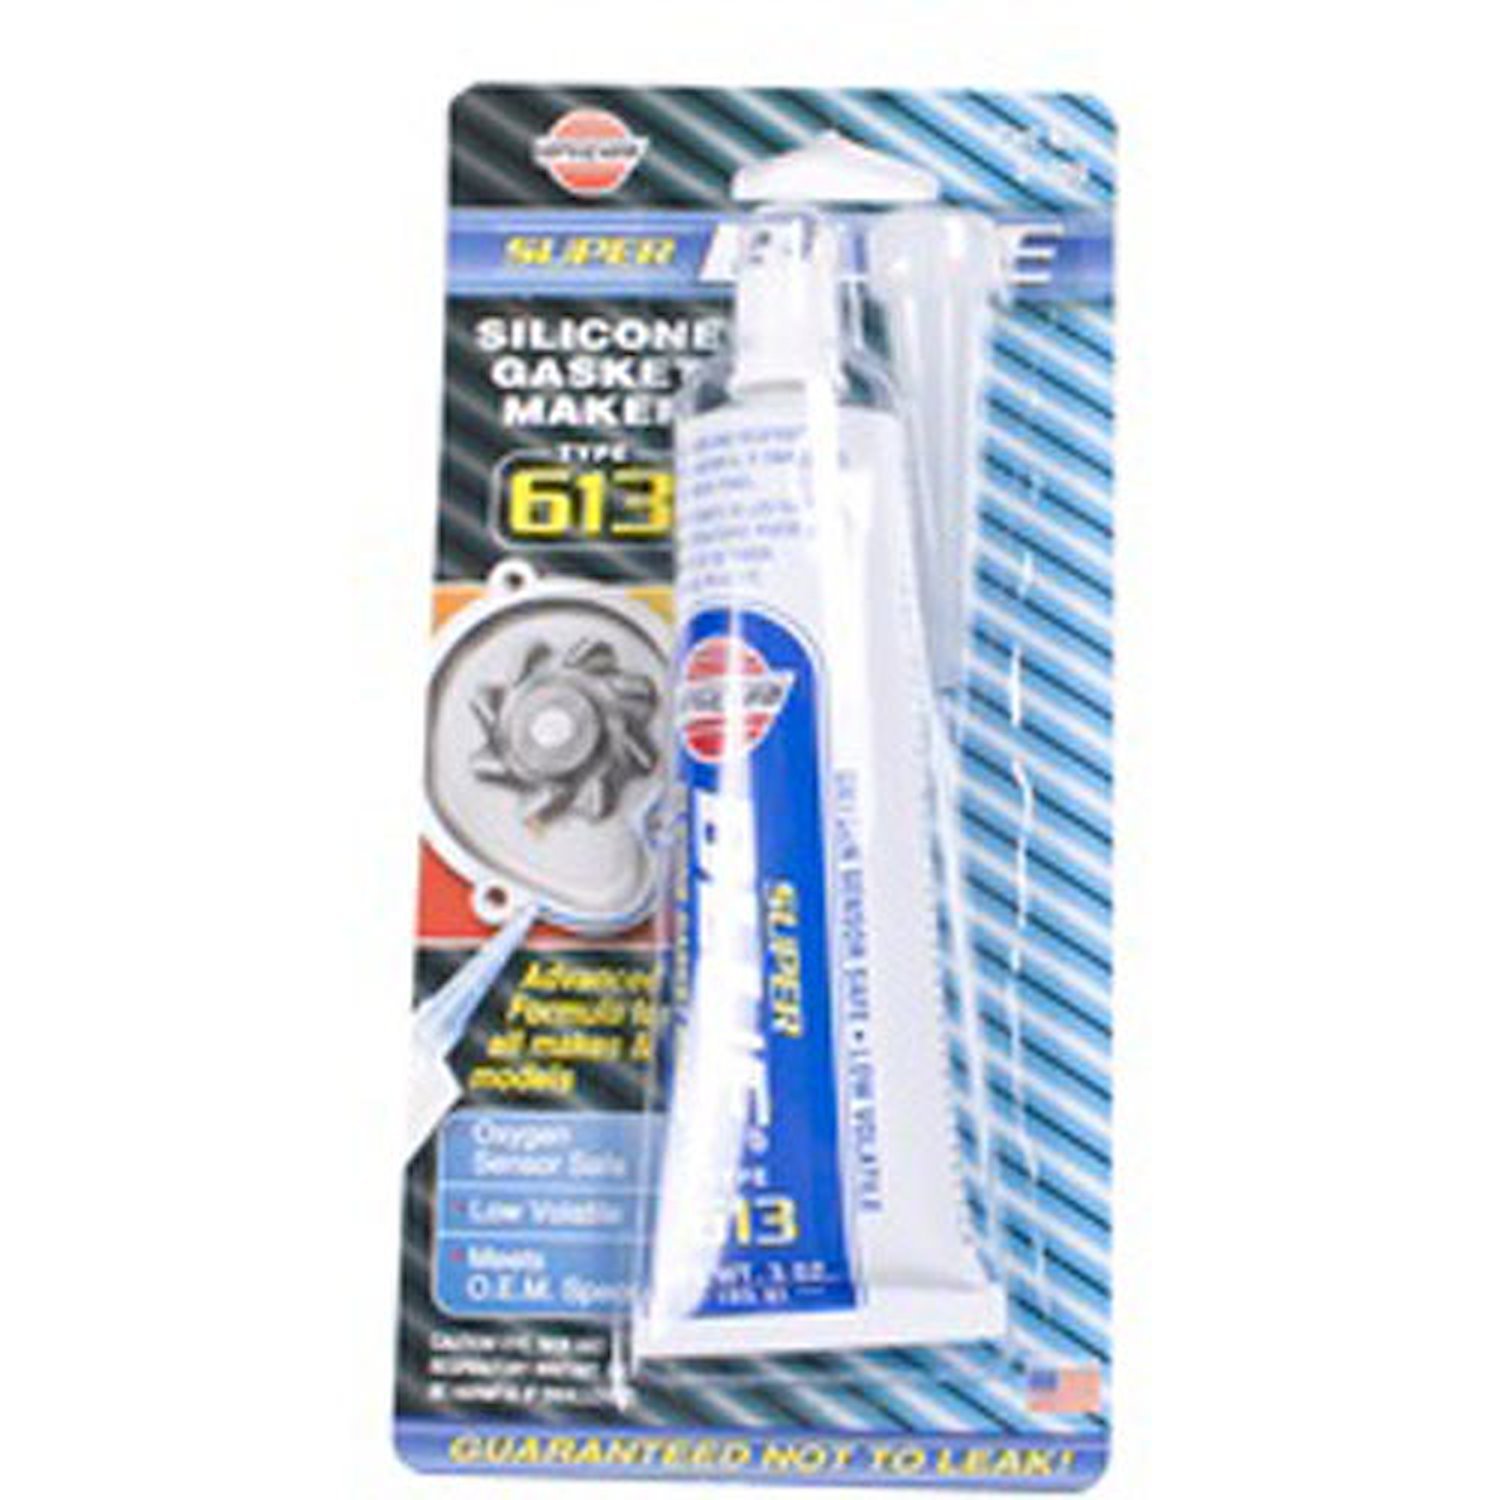 This 3 ounce tube of RTV silicone gasket sealer from Omix-ADA is used between metal surfaces to prevent leaks.